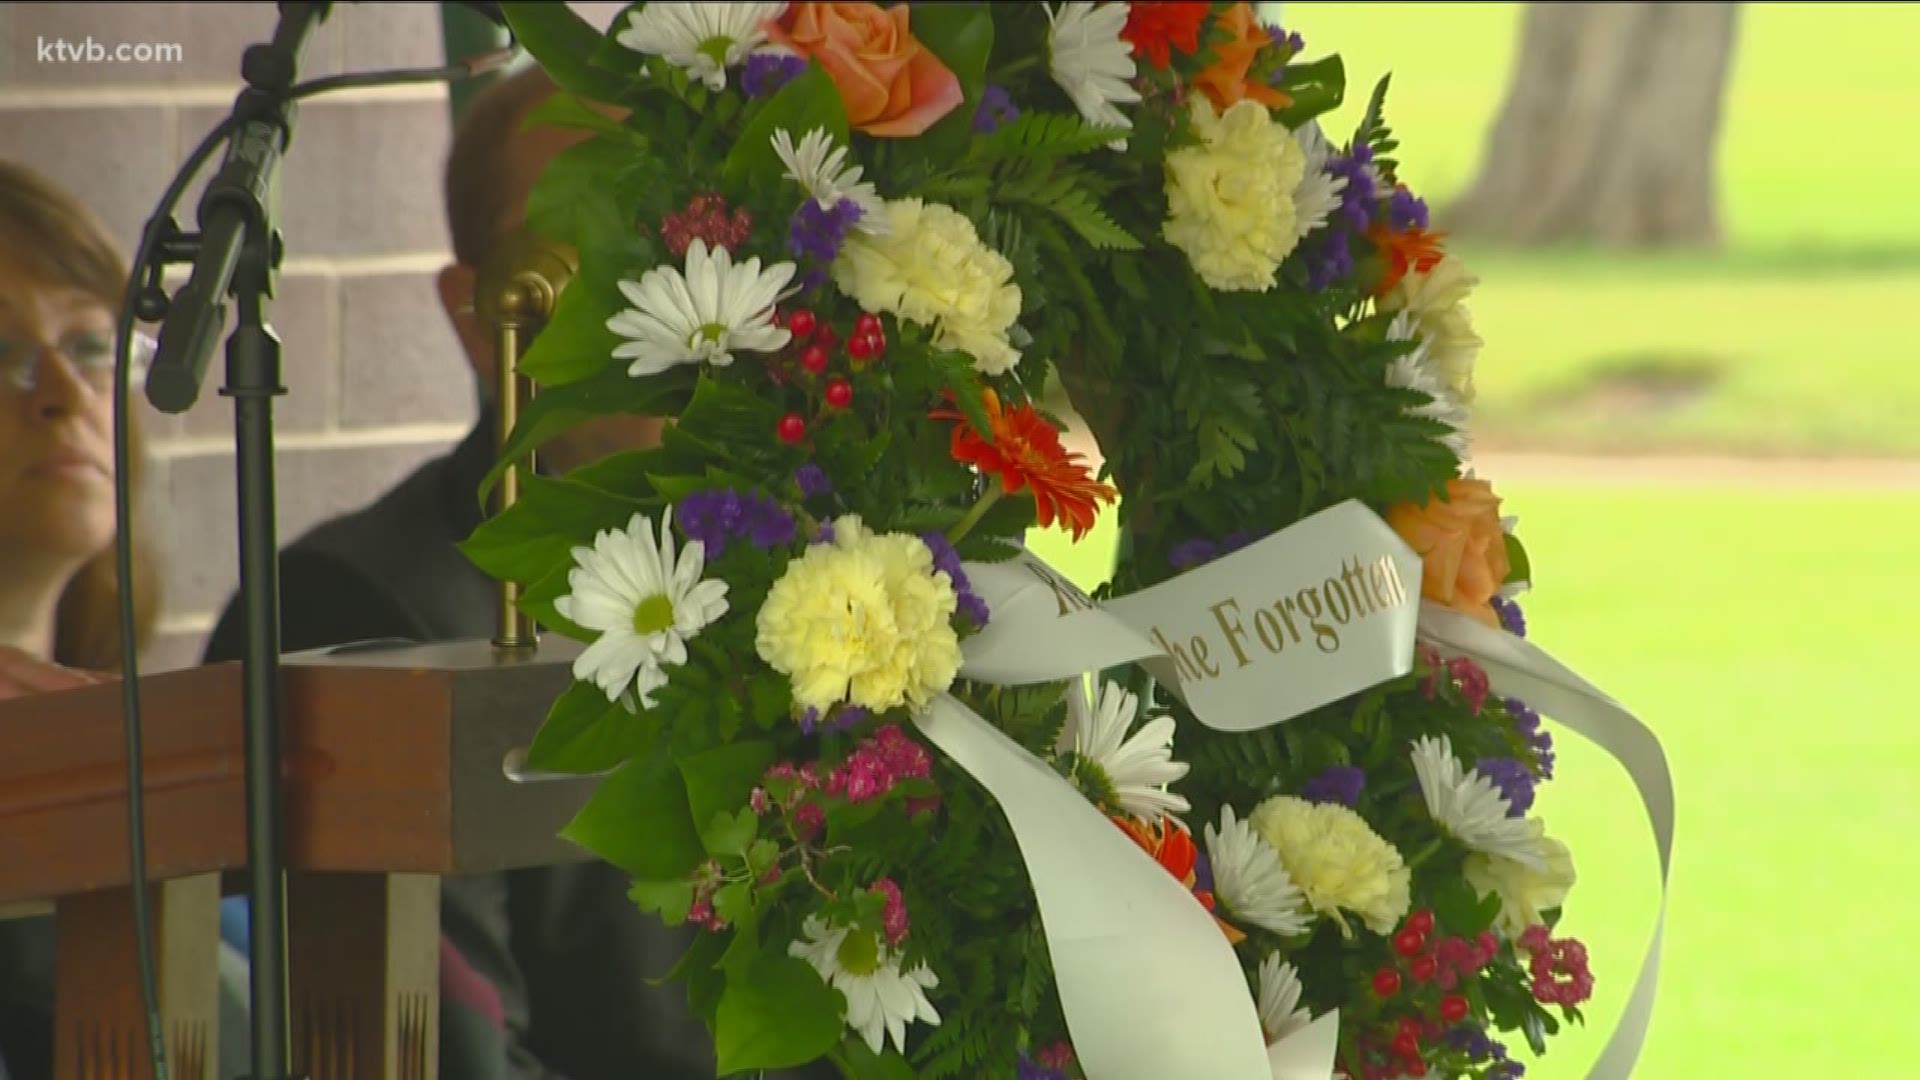 The remains of 12 people were laid to rest at the Terrace Lawn Memorial Gardens in Boise Thursday.